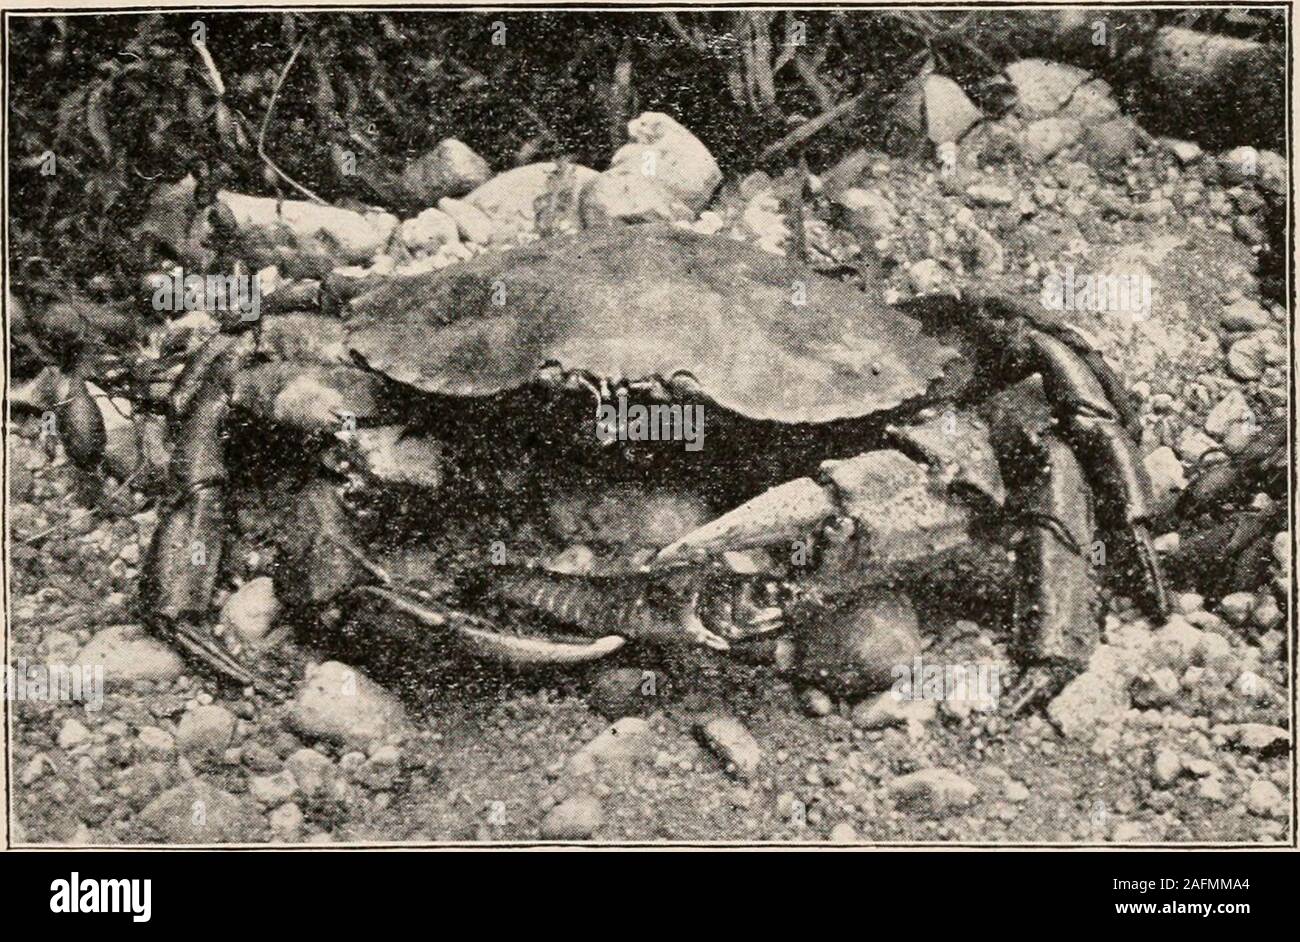 . Introduction to zoology; a guide to the study of animals, for the use of secondary schools;. FK;. 102. - - Panopeus sayi,allied to Cancer. The mud-crab. One-half nat. size.Photo, by W.H.C.P.. FIG. 103.— Callinectes hastatus, blue crab. Reduced to one-third. Photo. by W. H. C. P. 110 ZOOLOGY ostreum (Fig. 105), found in the mantle chamber of theoyster, is eaten by us together with the oyster or separately. Stock Photo